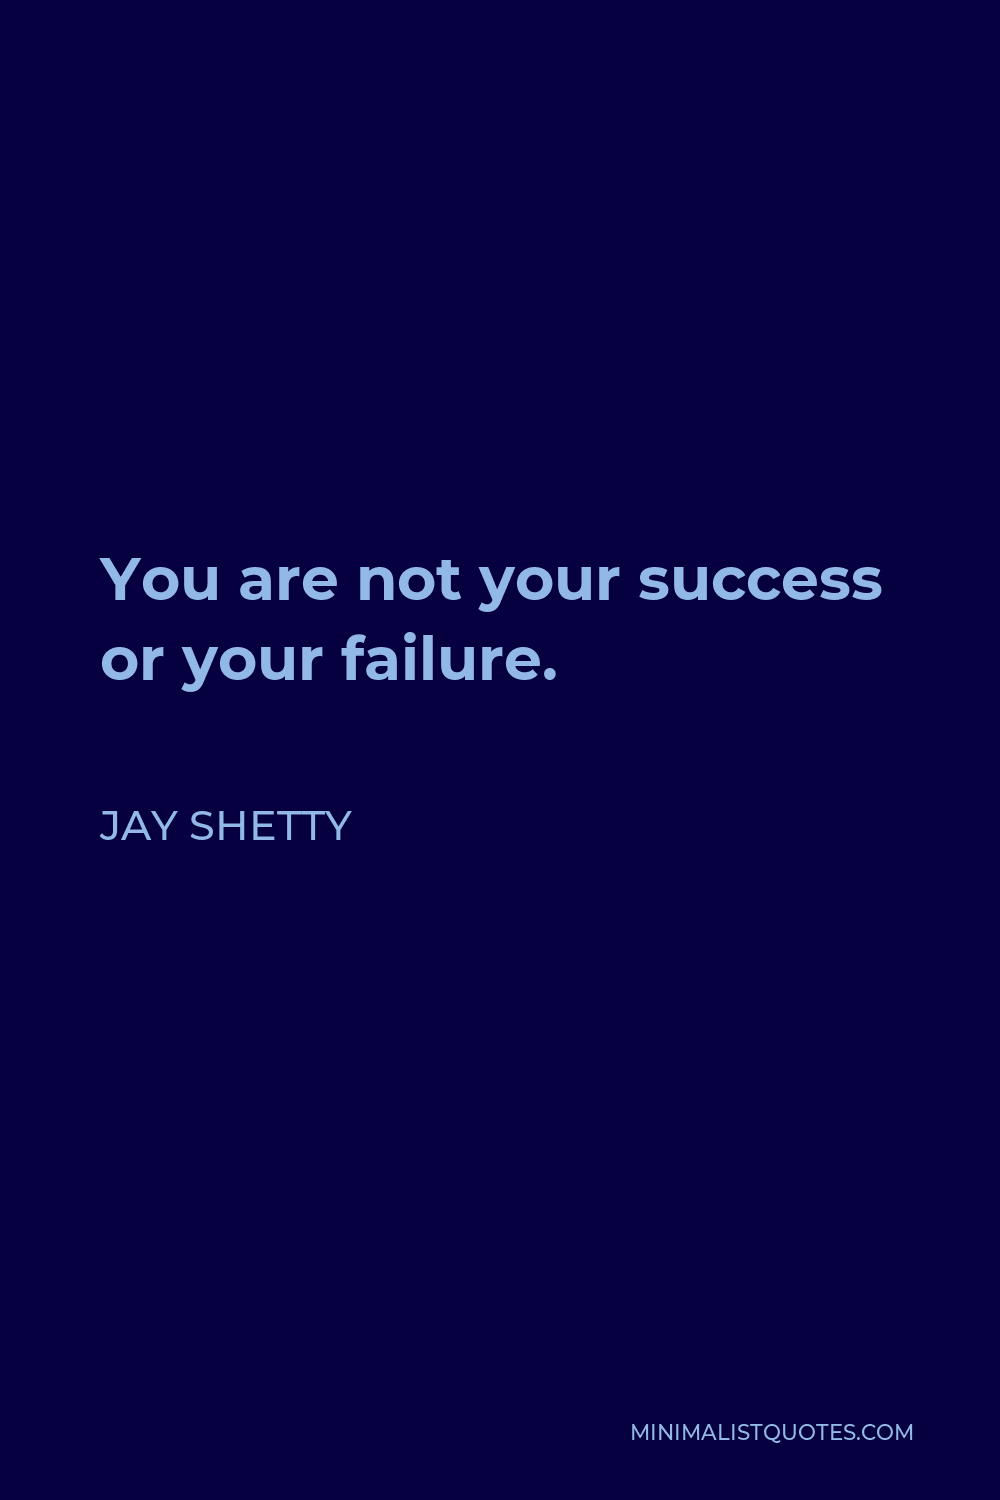 Jay Shetty Quote - You are not your success or your failure.